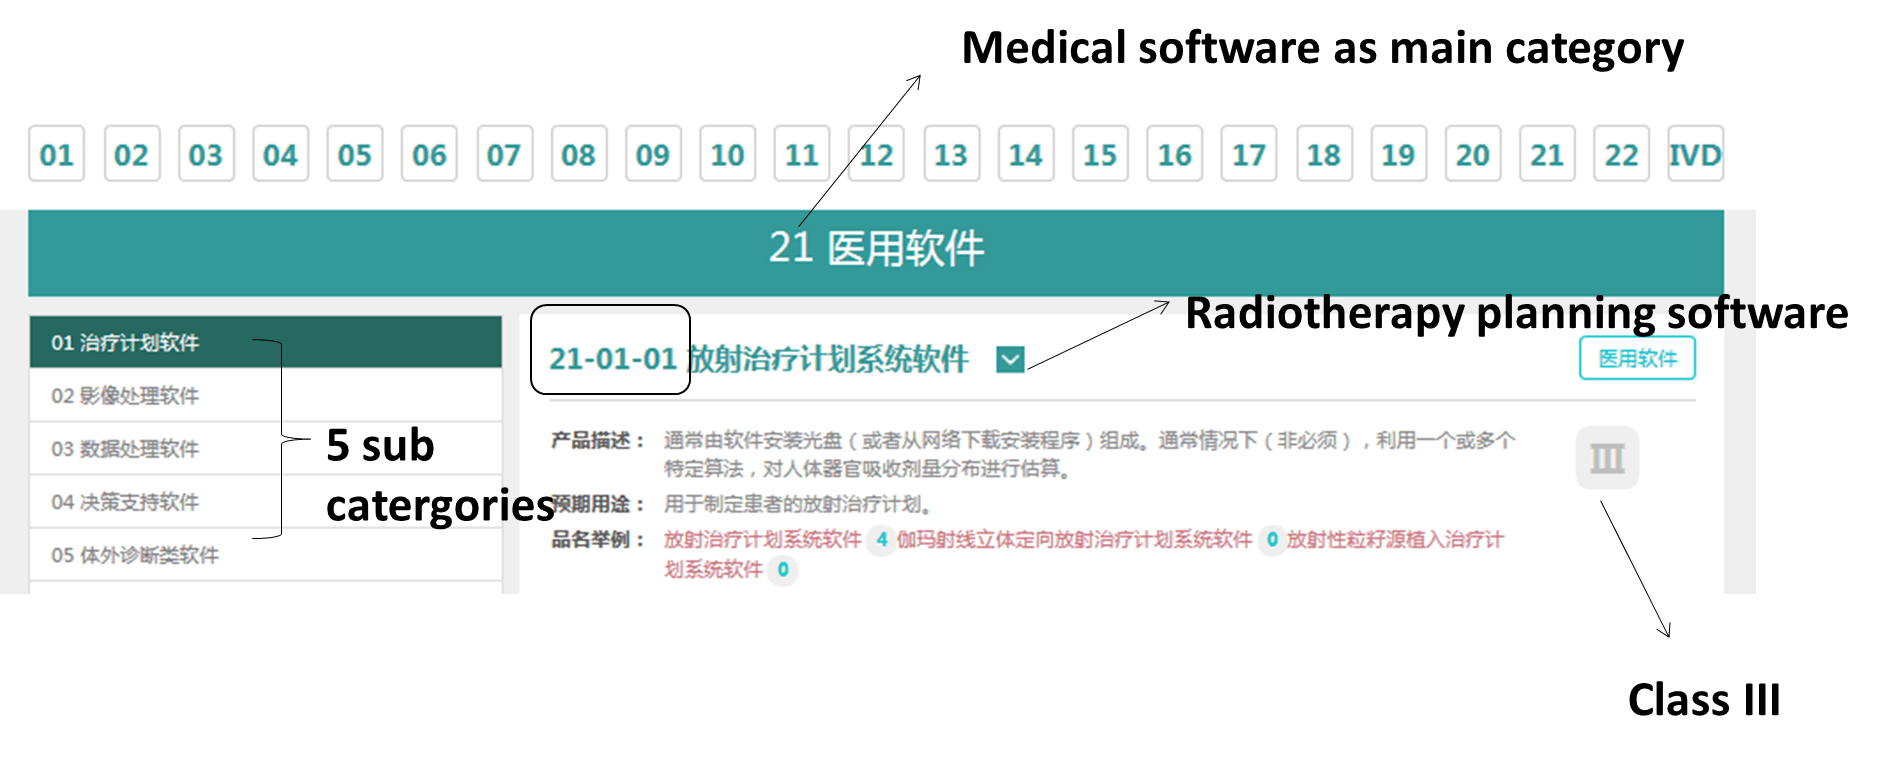 Product code of medical software in China